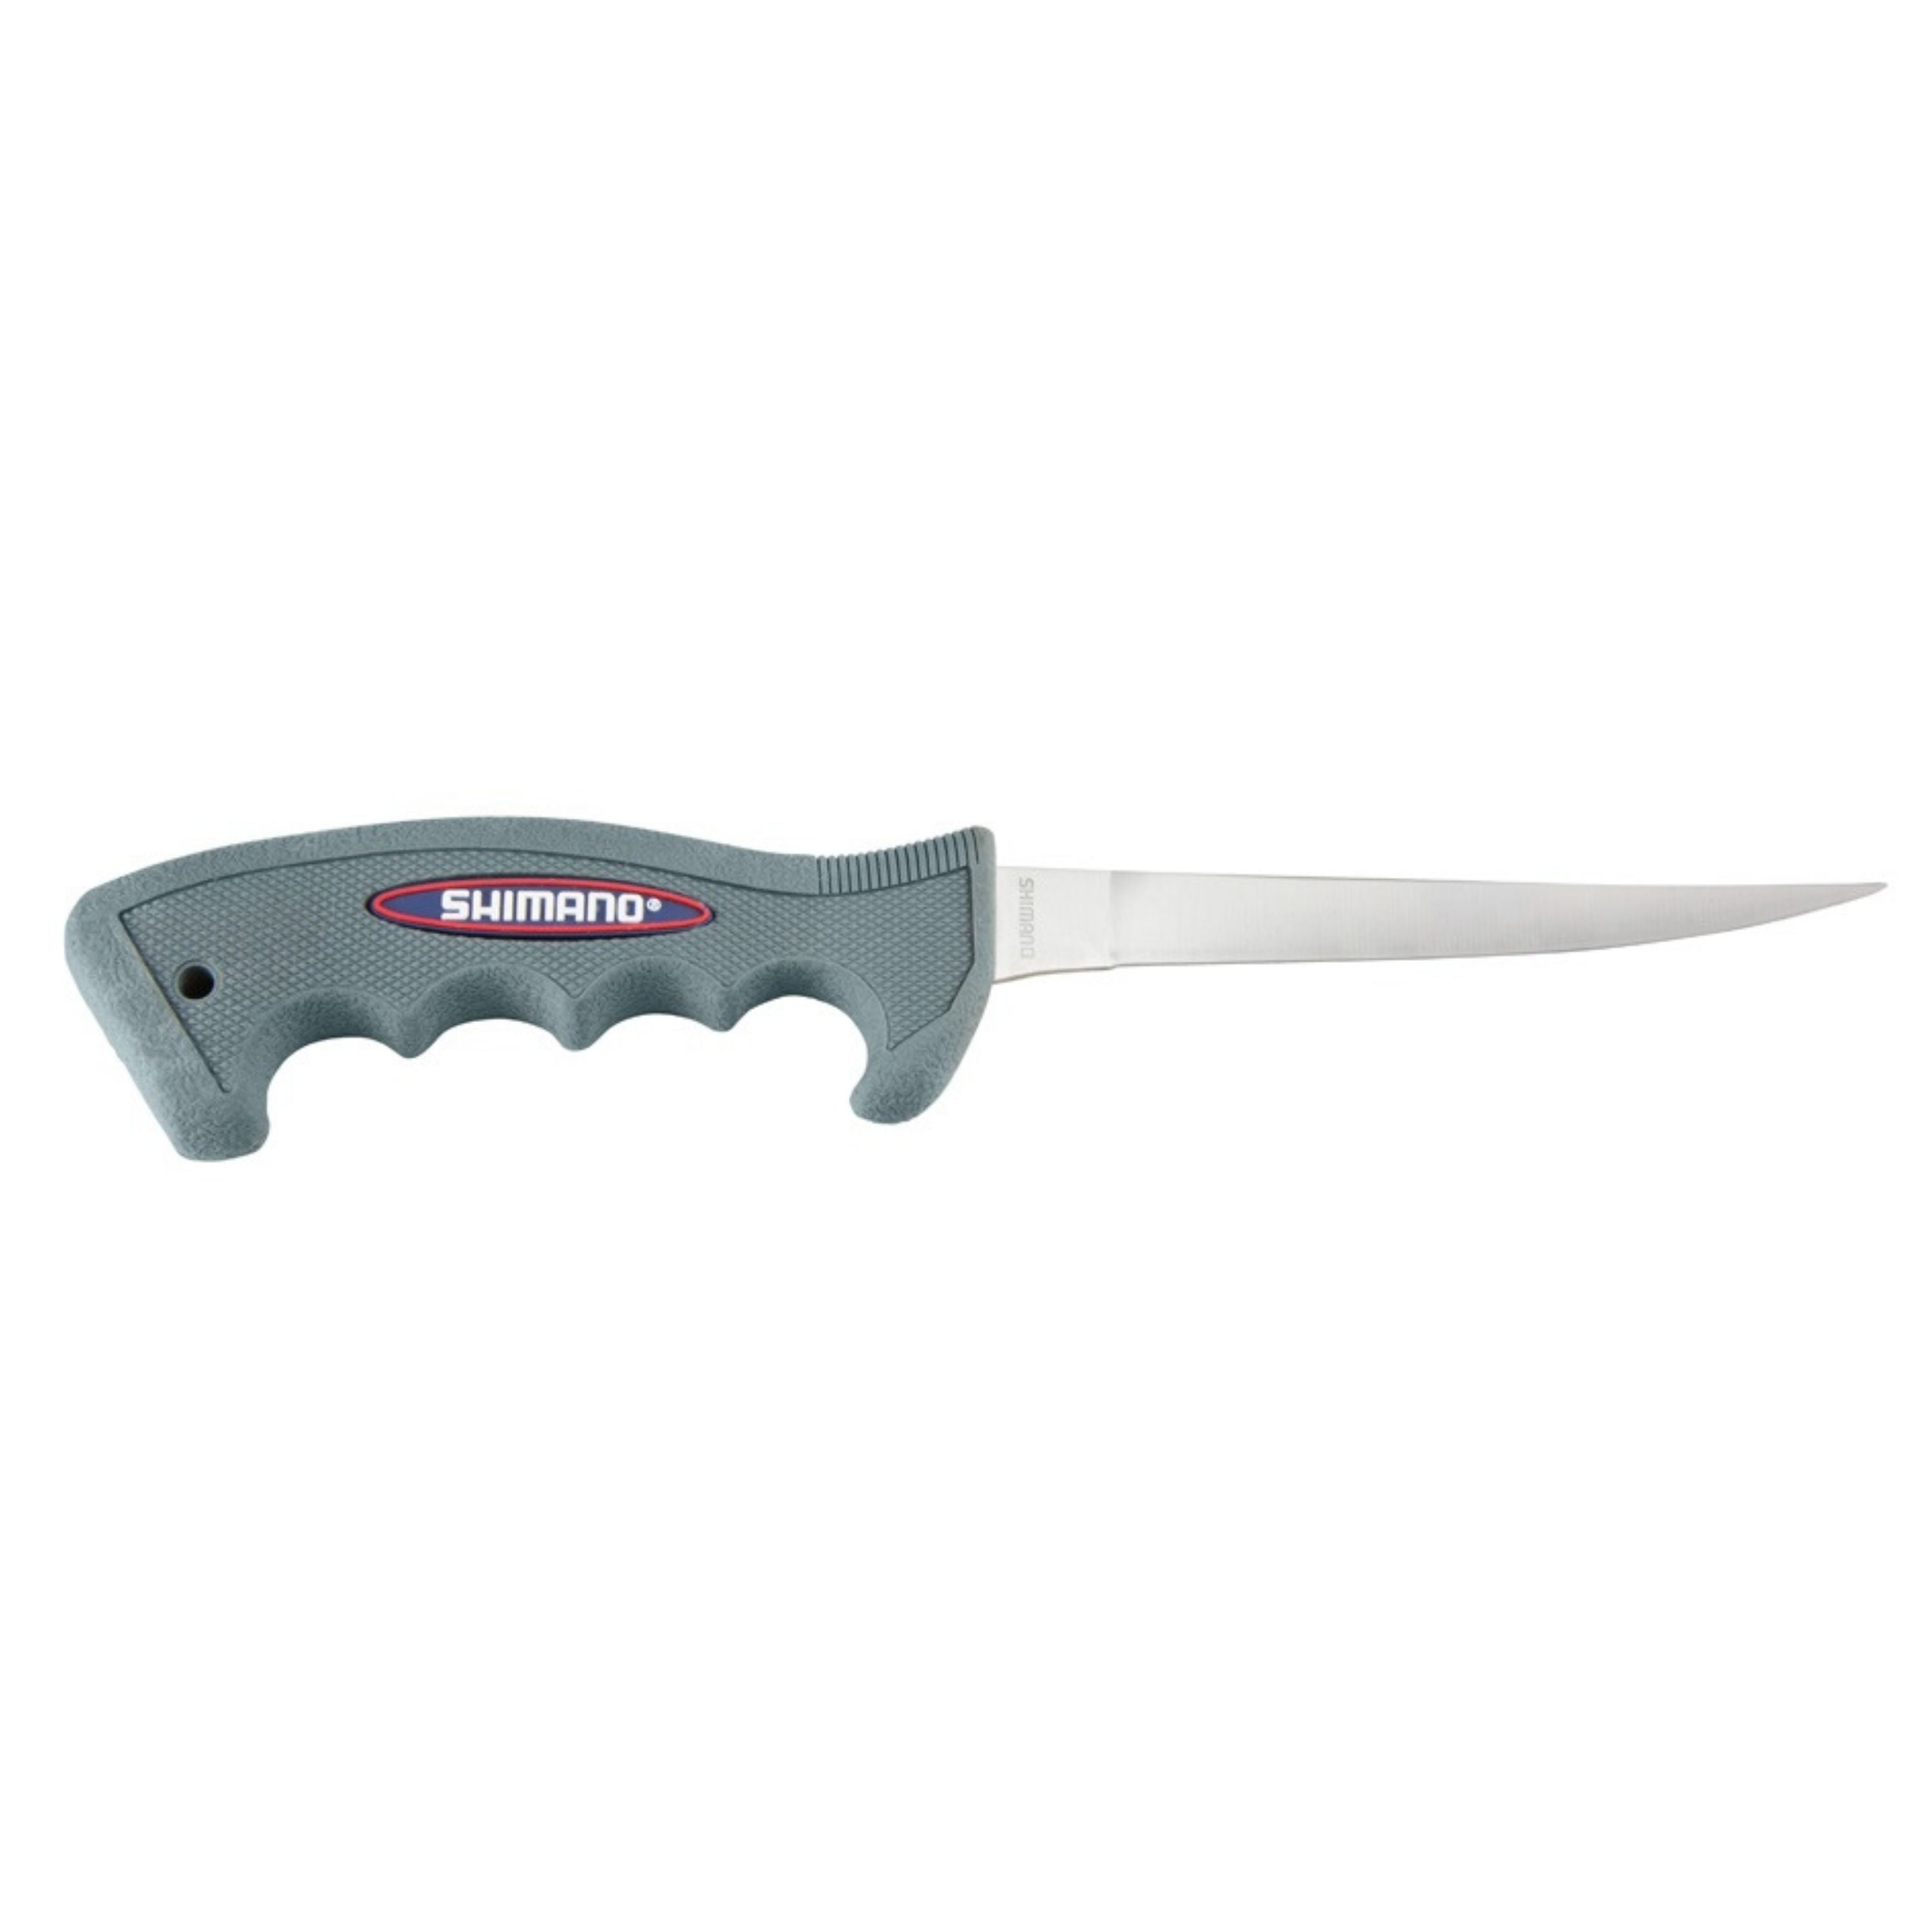 Shimano Fillet Knife with Sheath